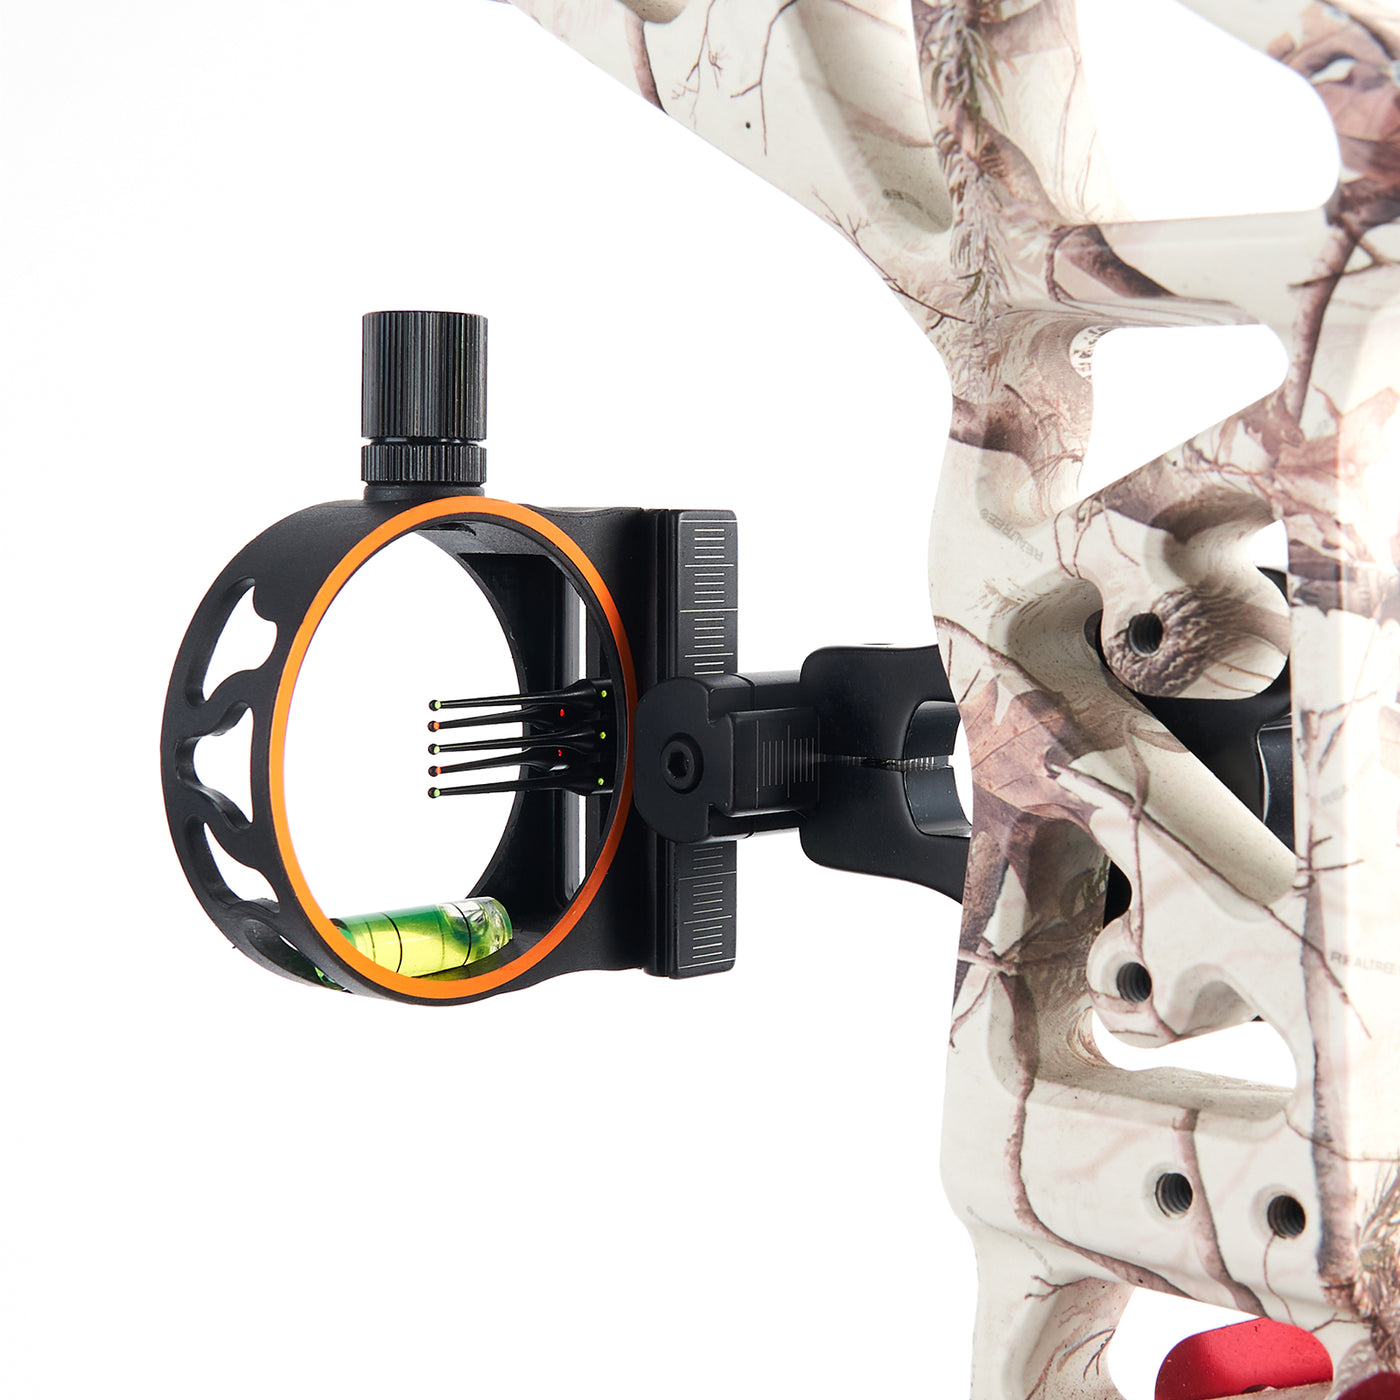 Topoint TP1550 5-Pin Bow Sight With Light